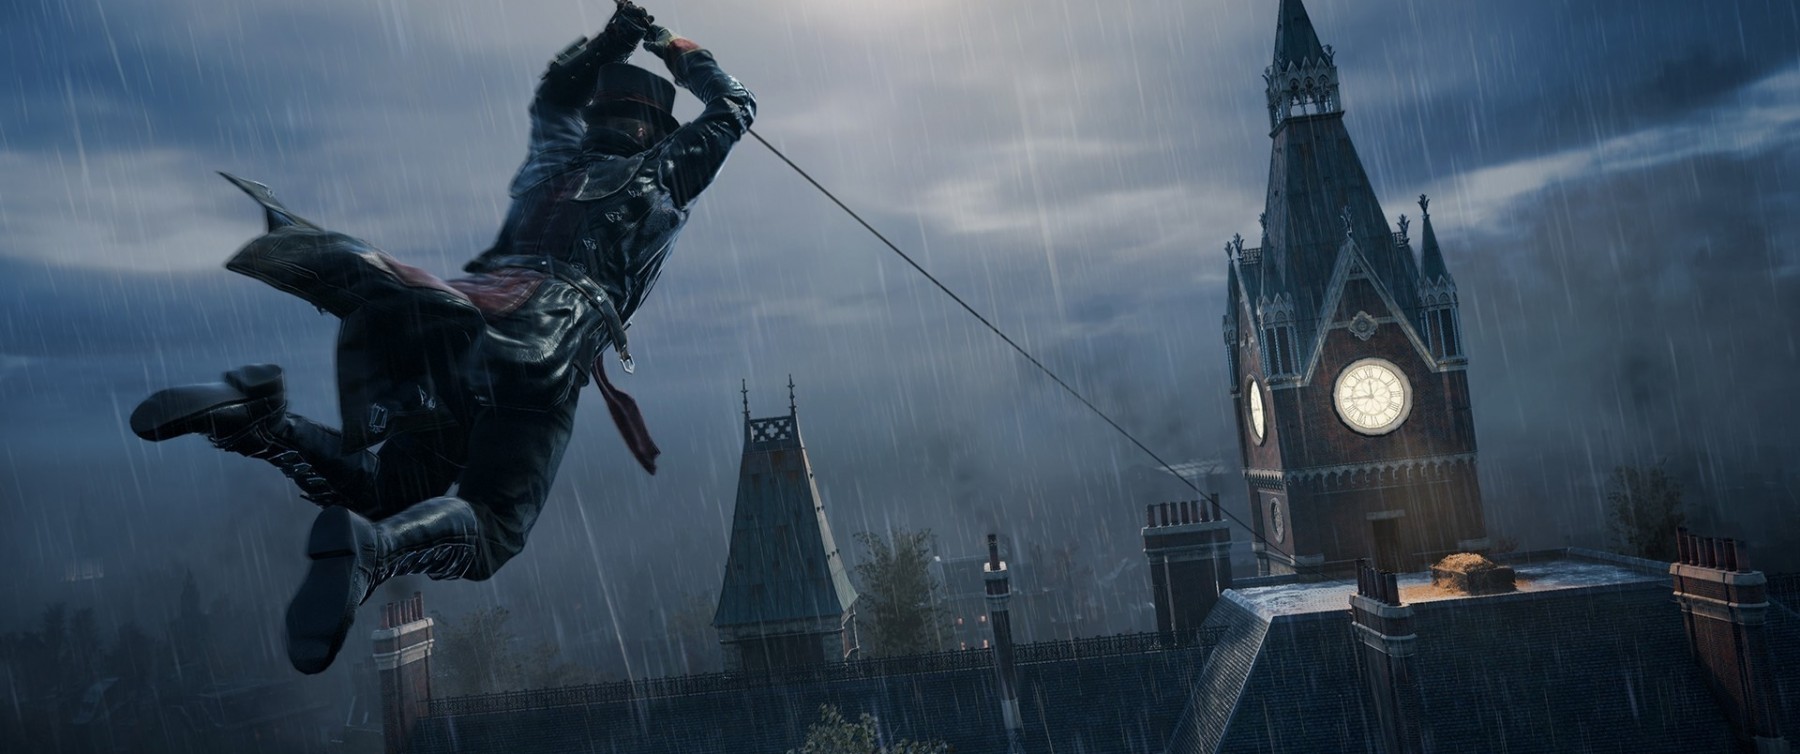 Assassin Creed Syndicate - Gameplay Assassin Creed Syndicate , HD Wallpaper & Backgrounds